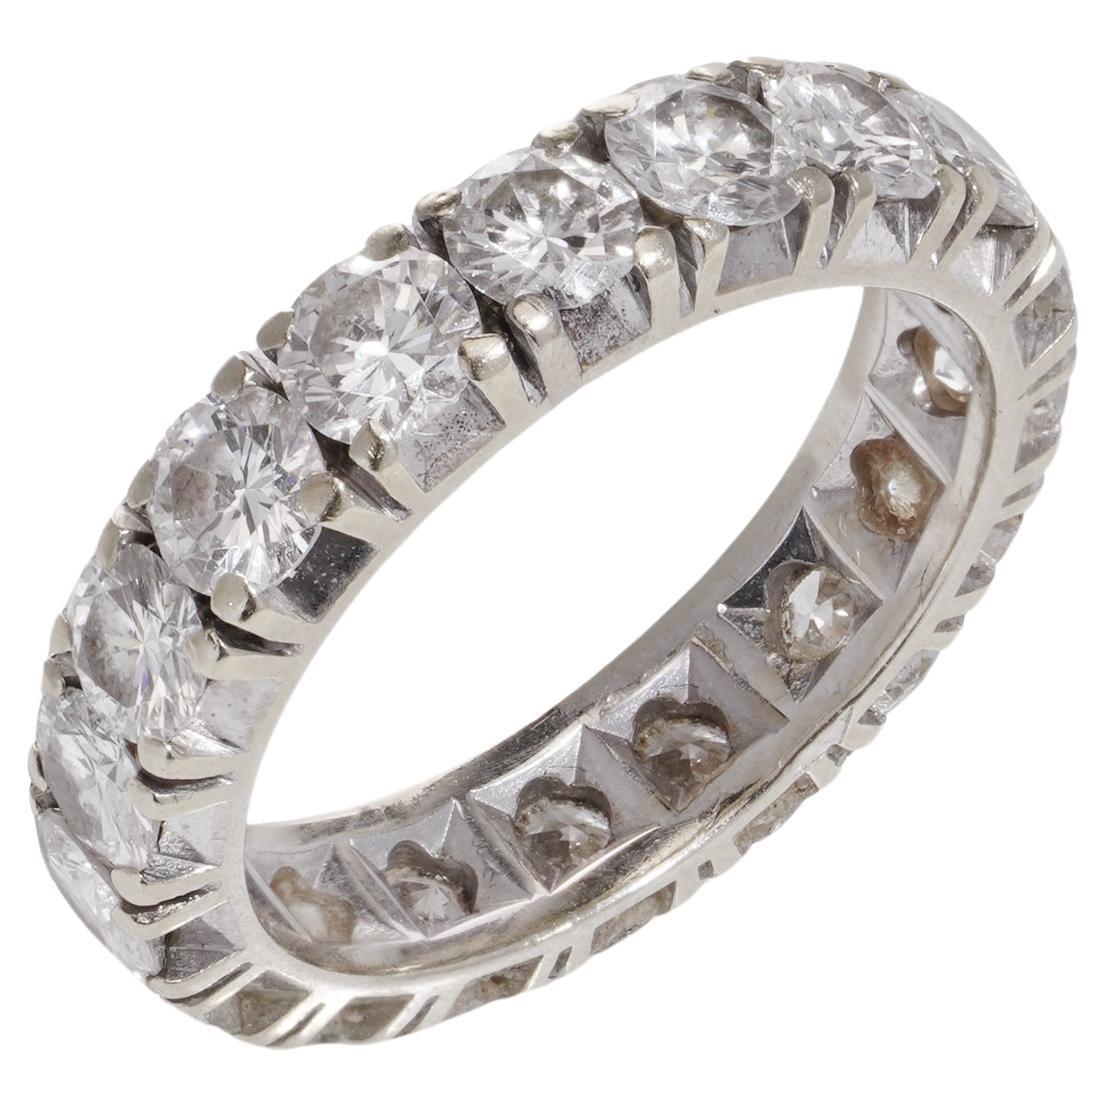 18k Gold Diamond Eternity Band Ring with 3.24 cts. of diamonds 